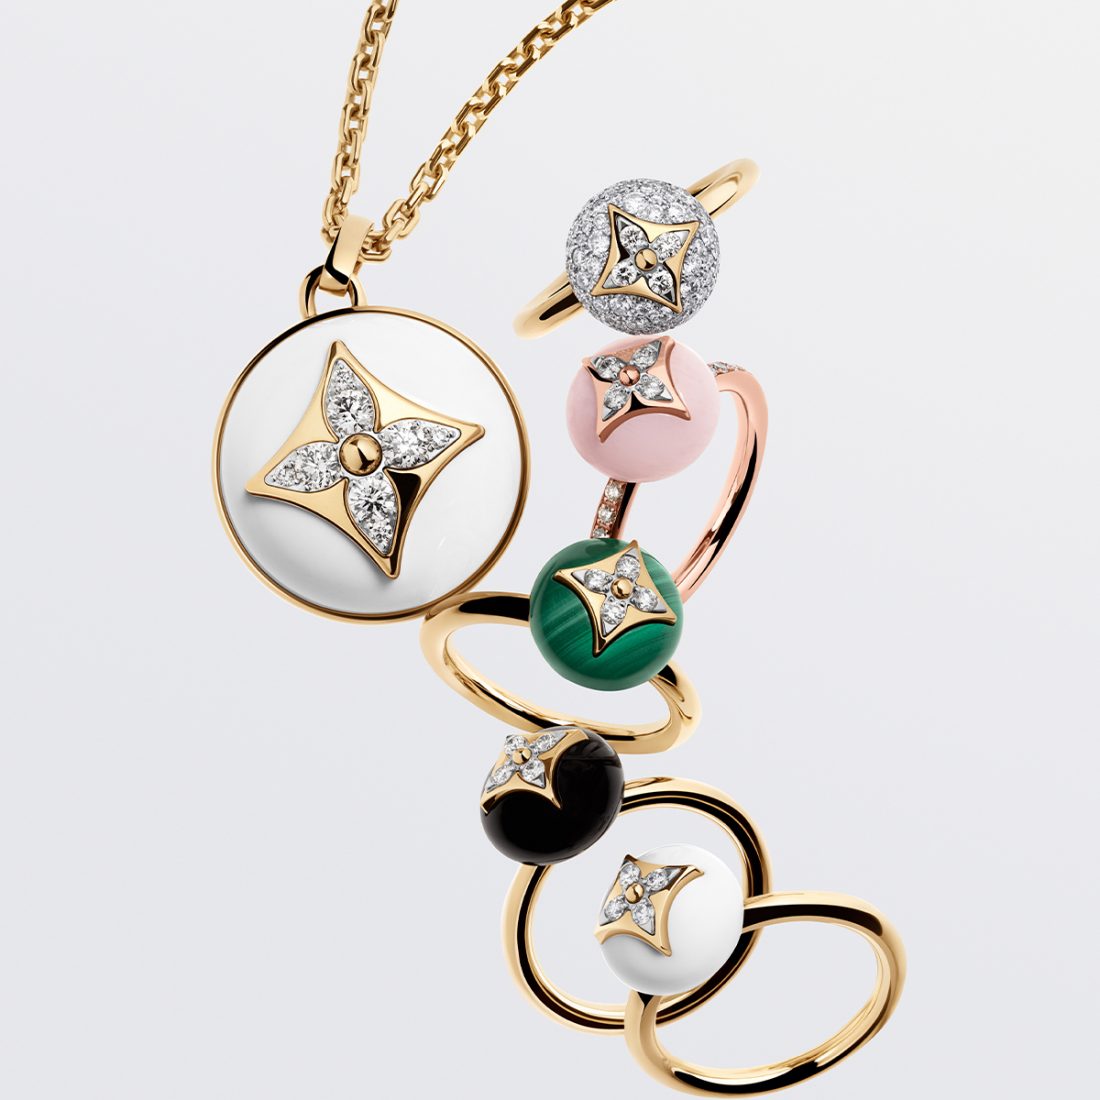 Louis Vuitton: Louis Vuitton Introduces New Designs To Its Emblematic  Blossom Jewelry Collection - Luxferity